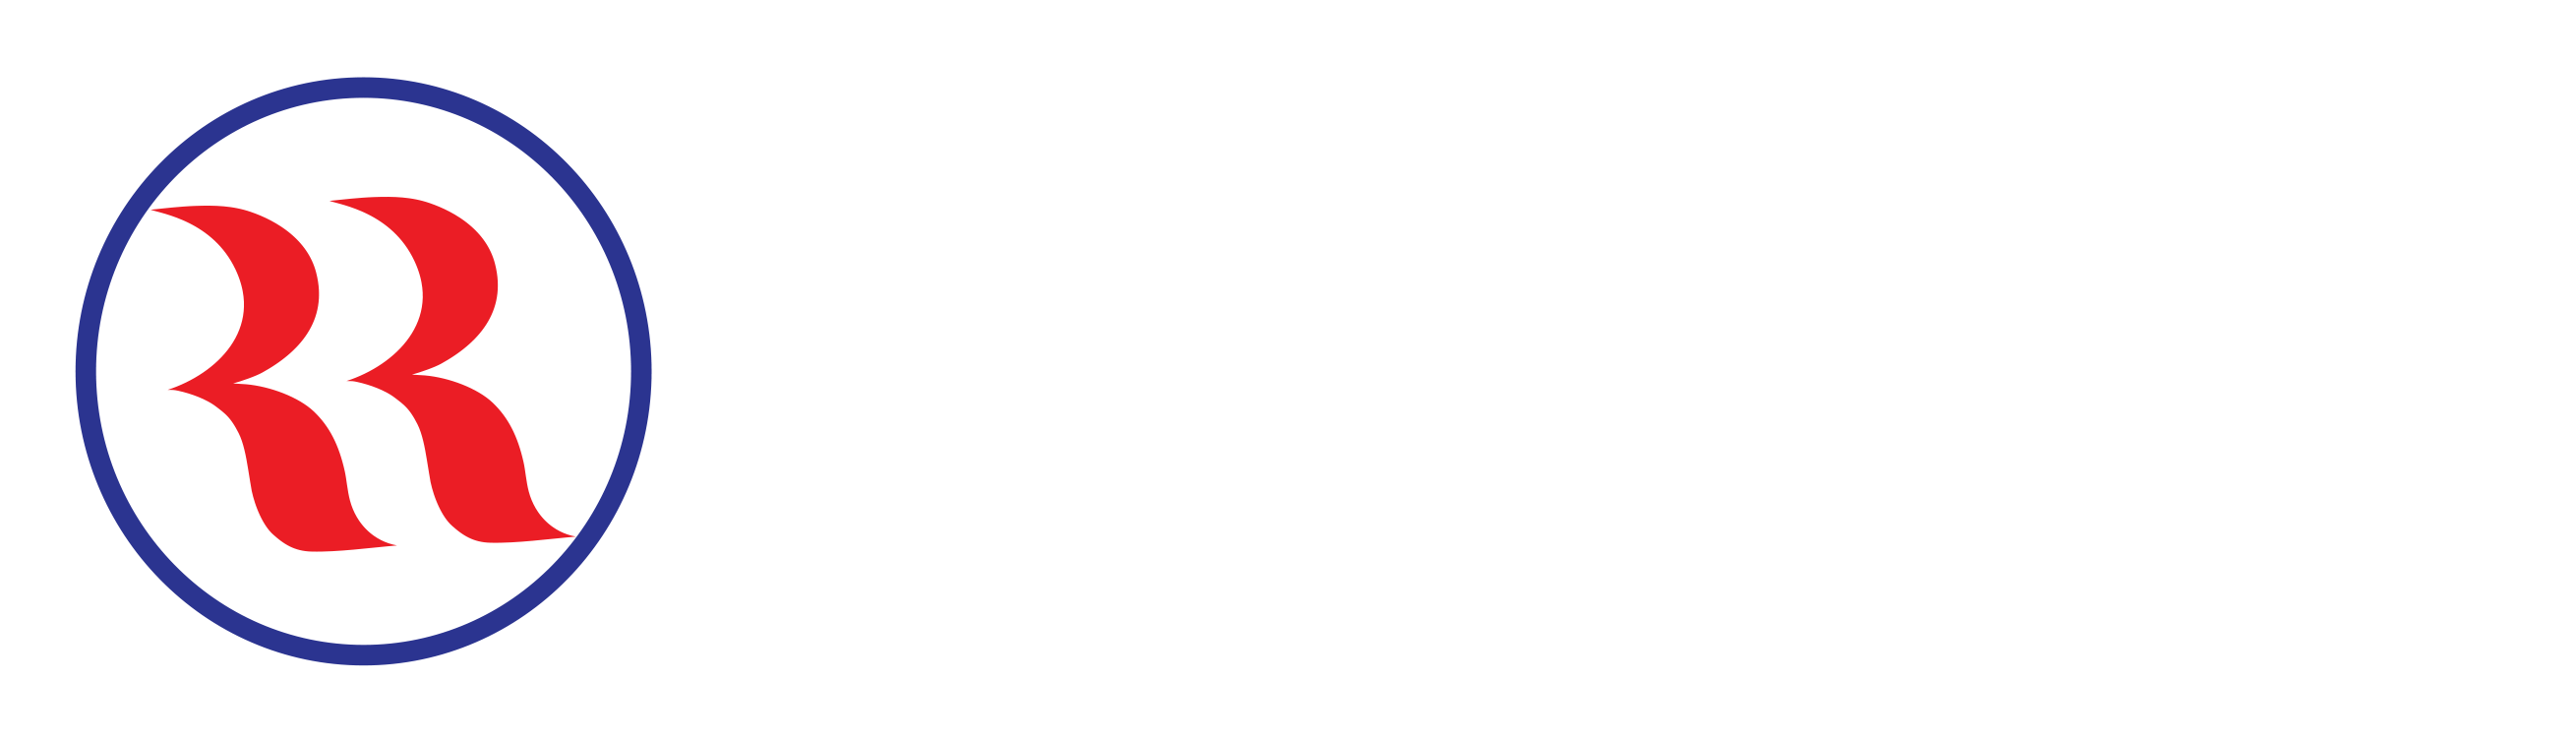 RR Policy